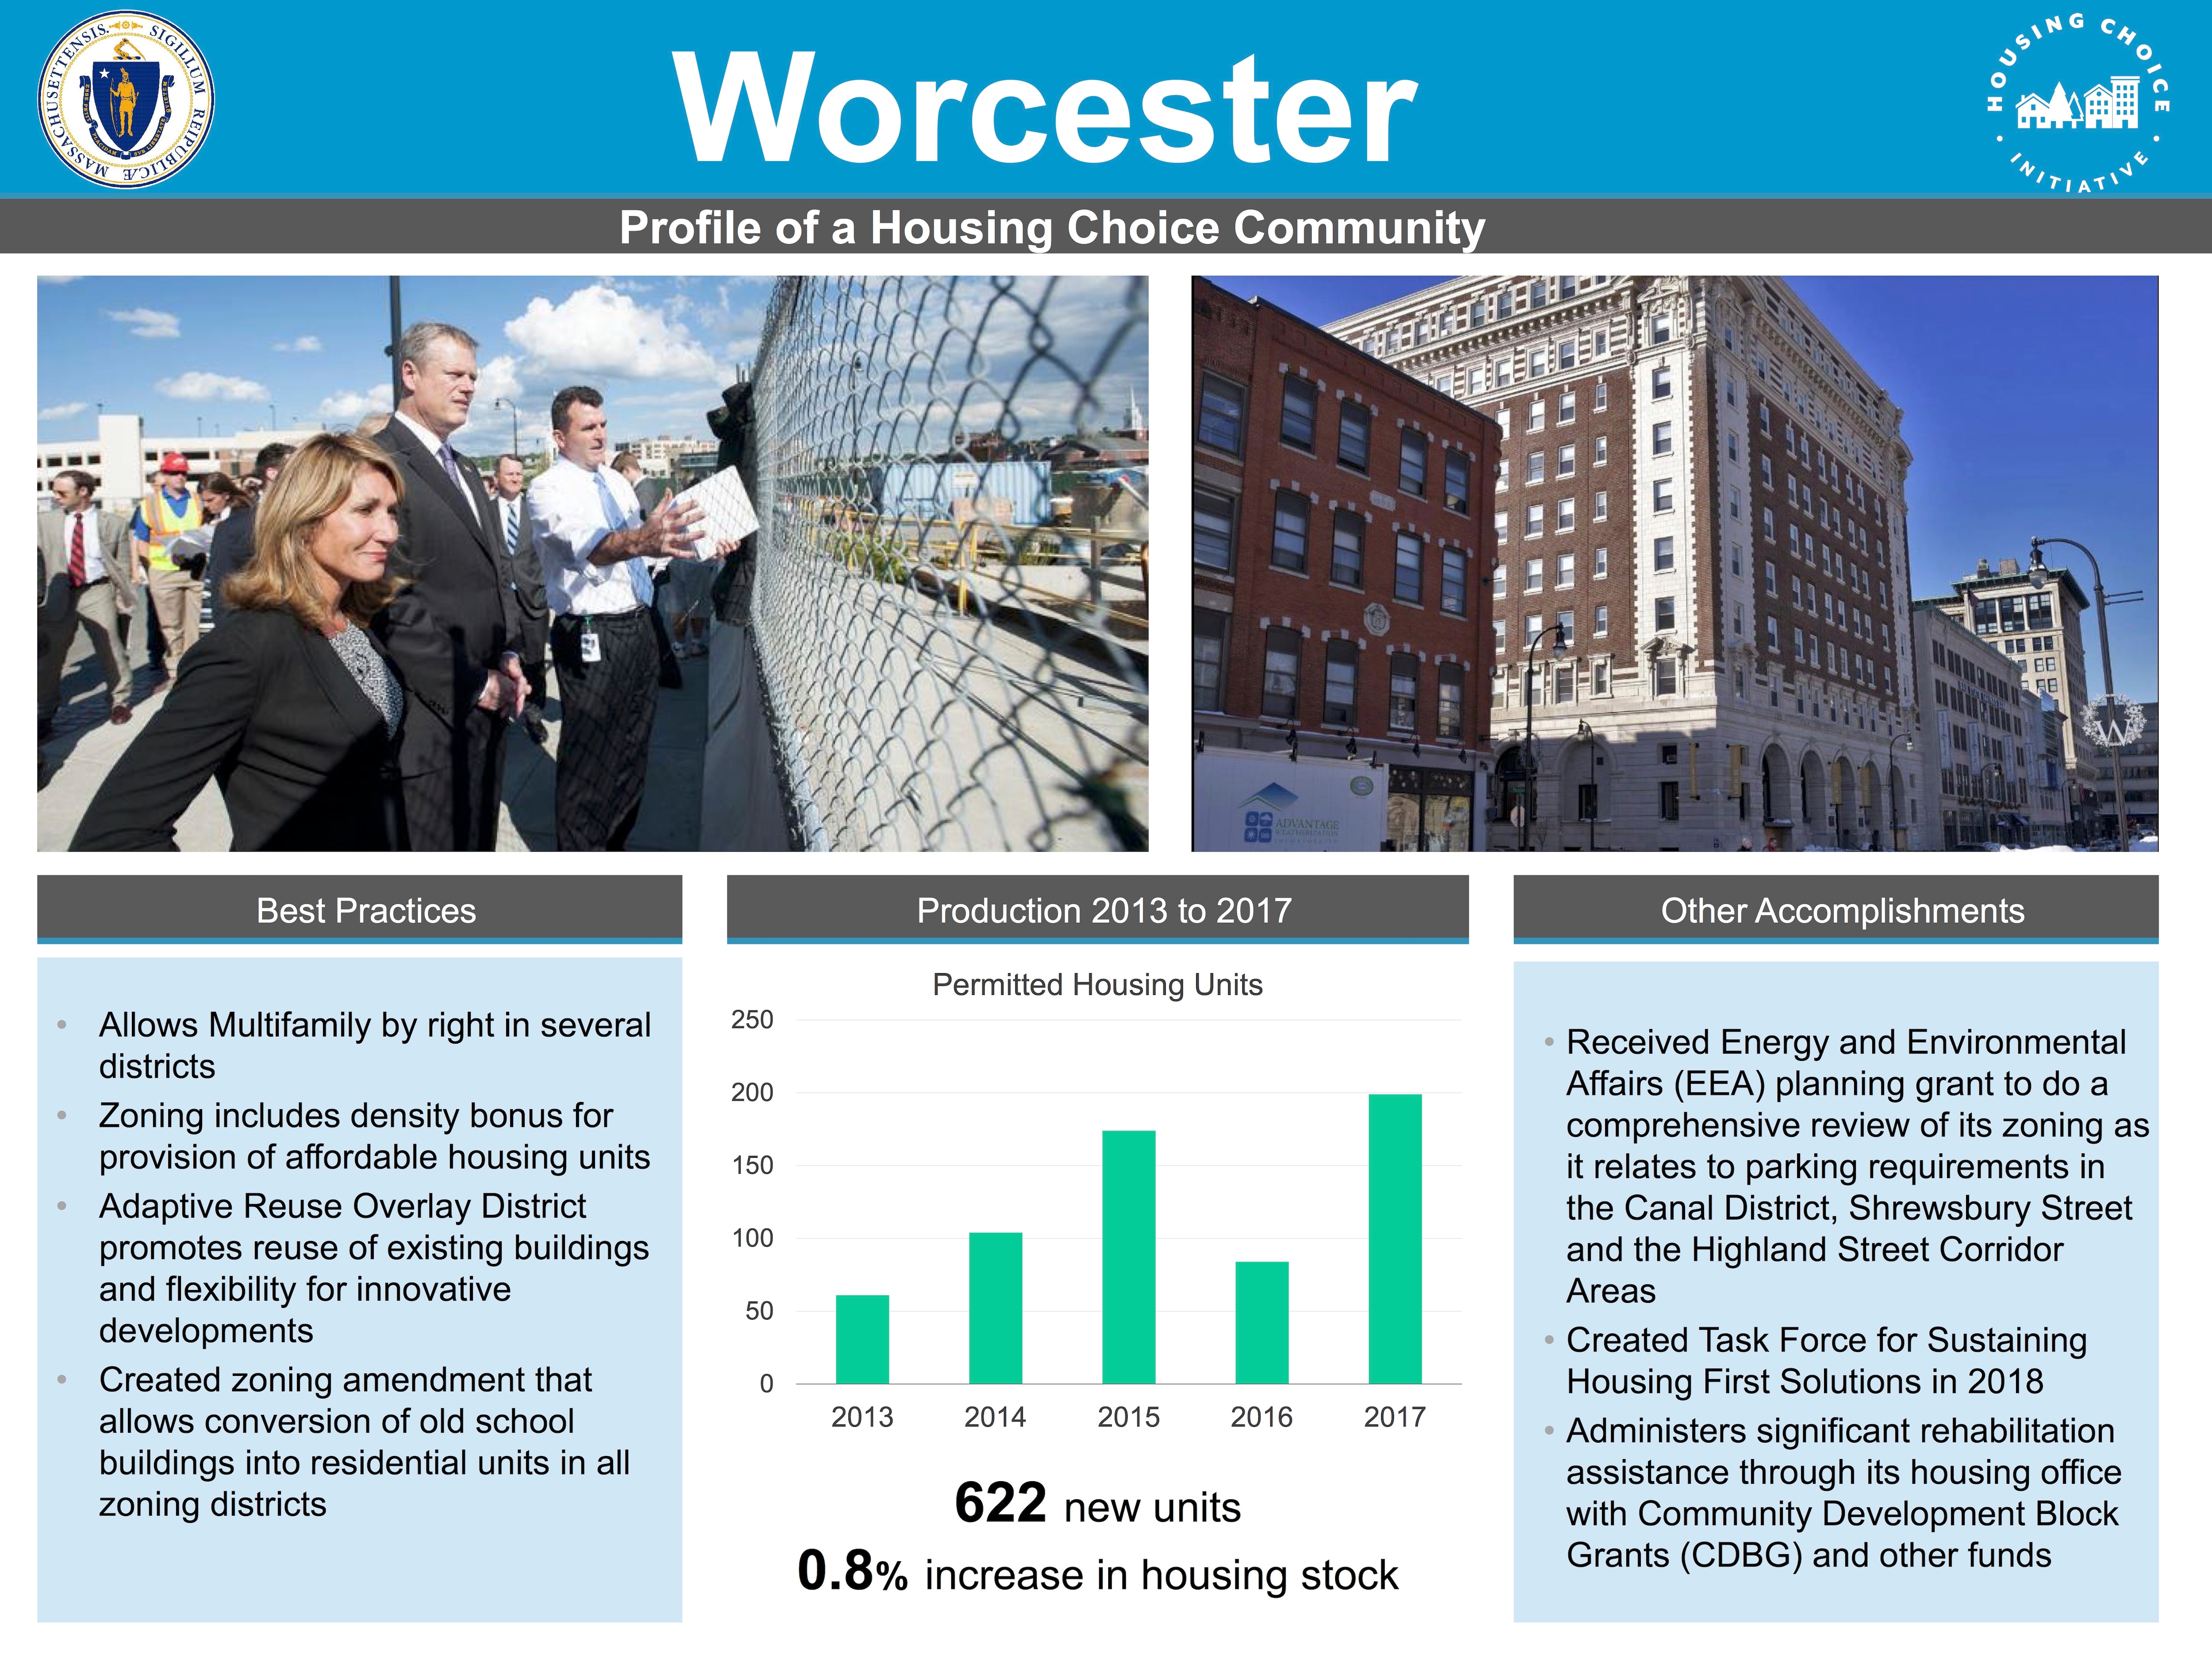 Profile of a Housing Choice Community - Worcester